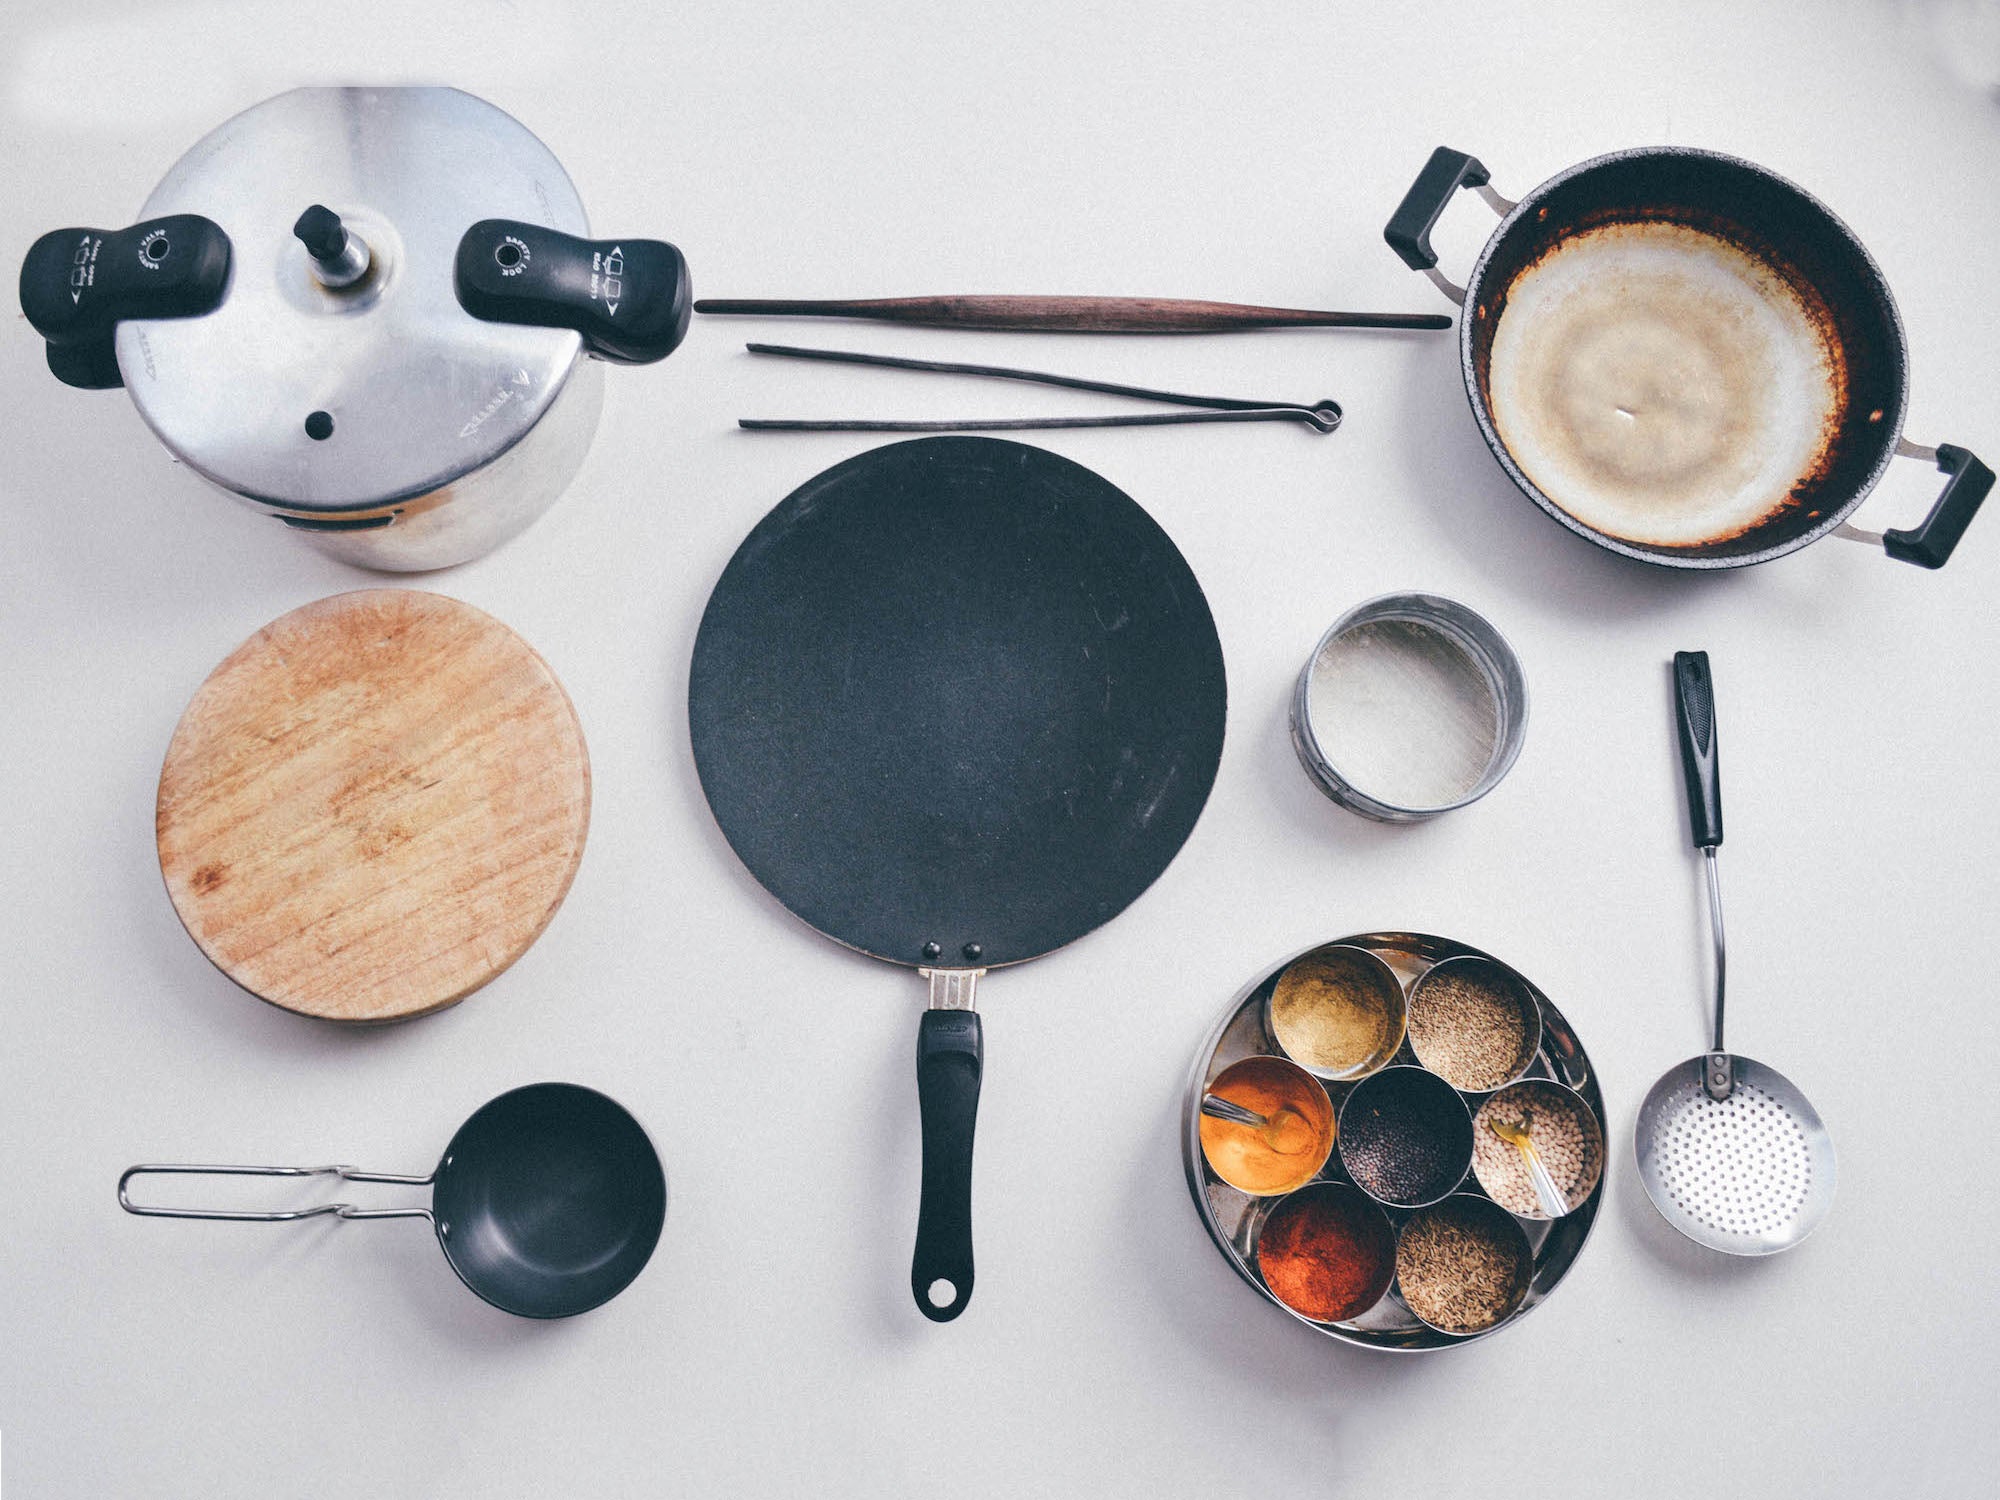 A Complete Guide to Essential Indian Kitchen Tools - Masala and Chai